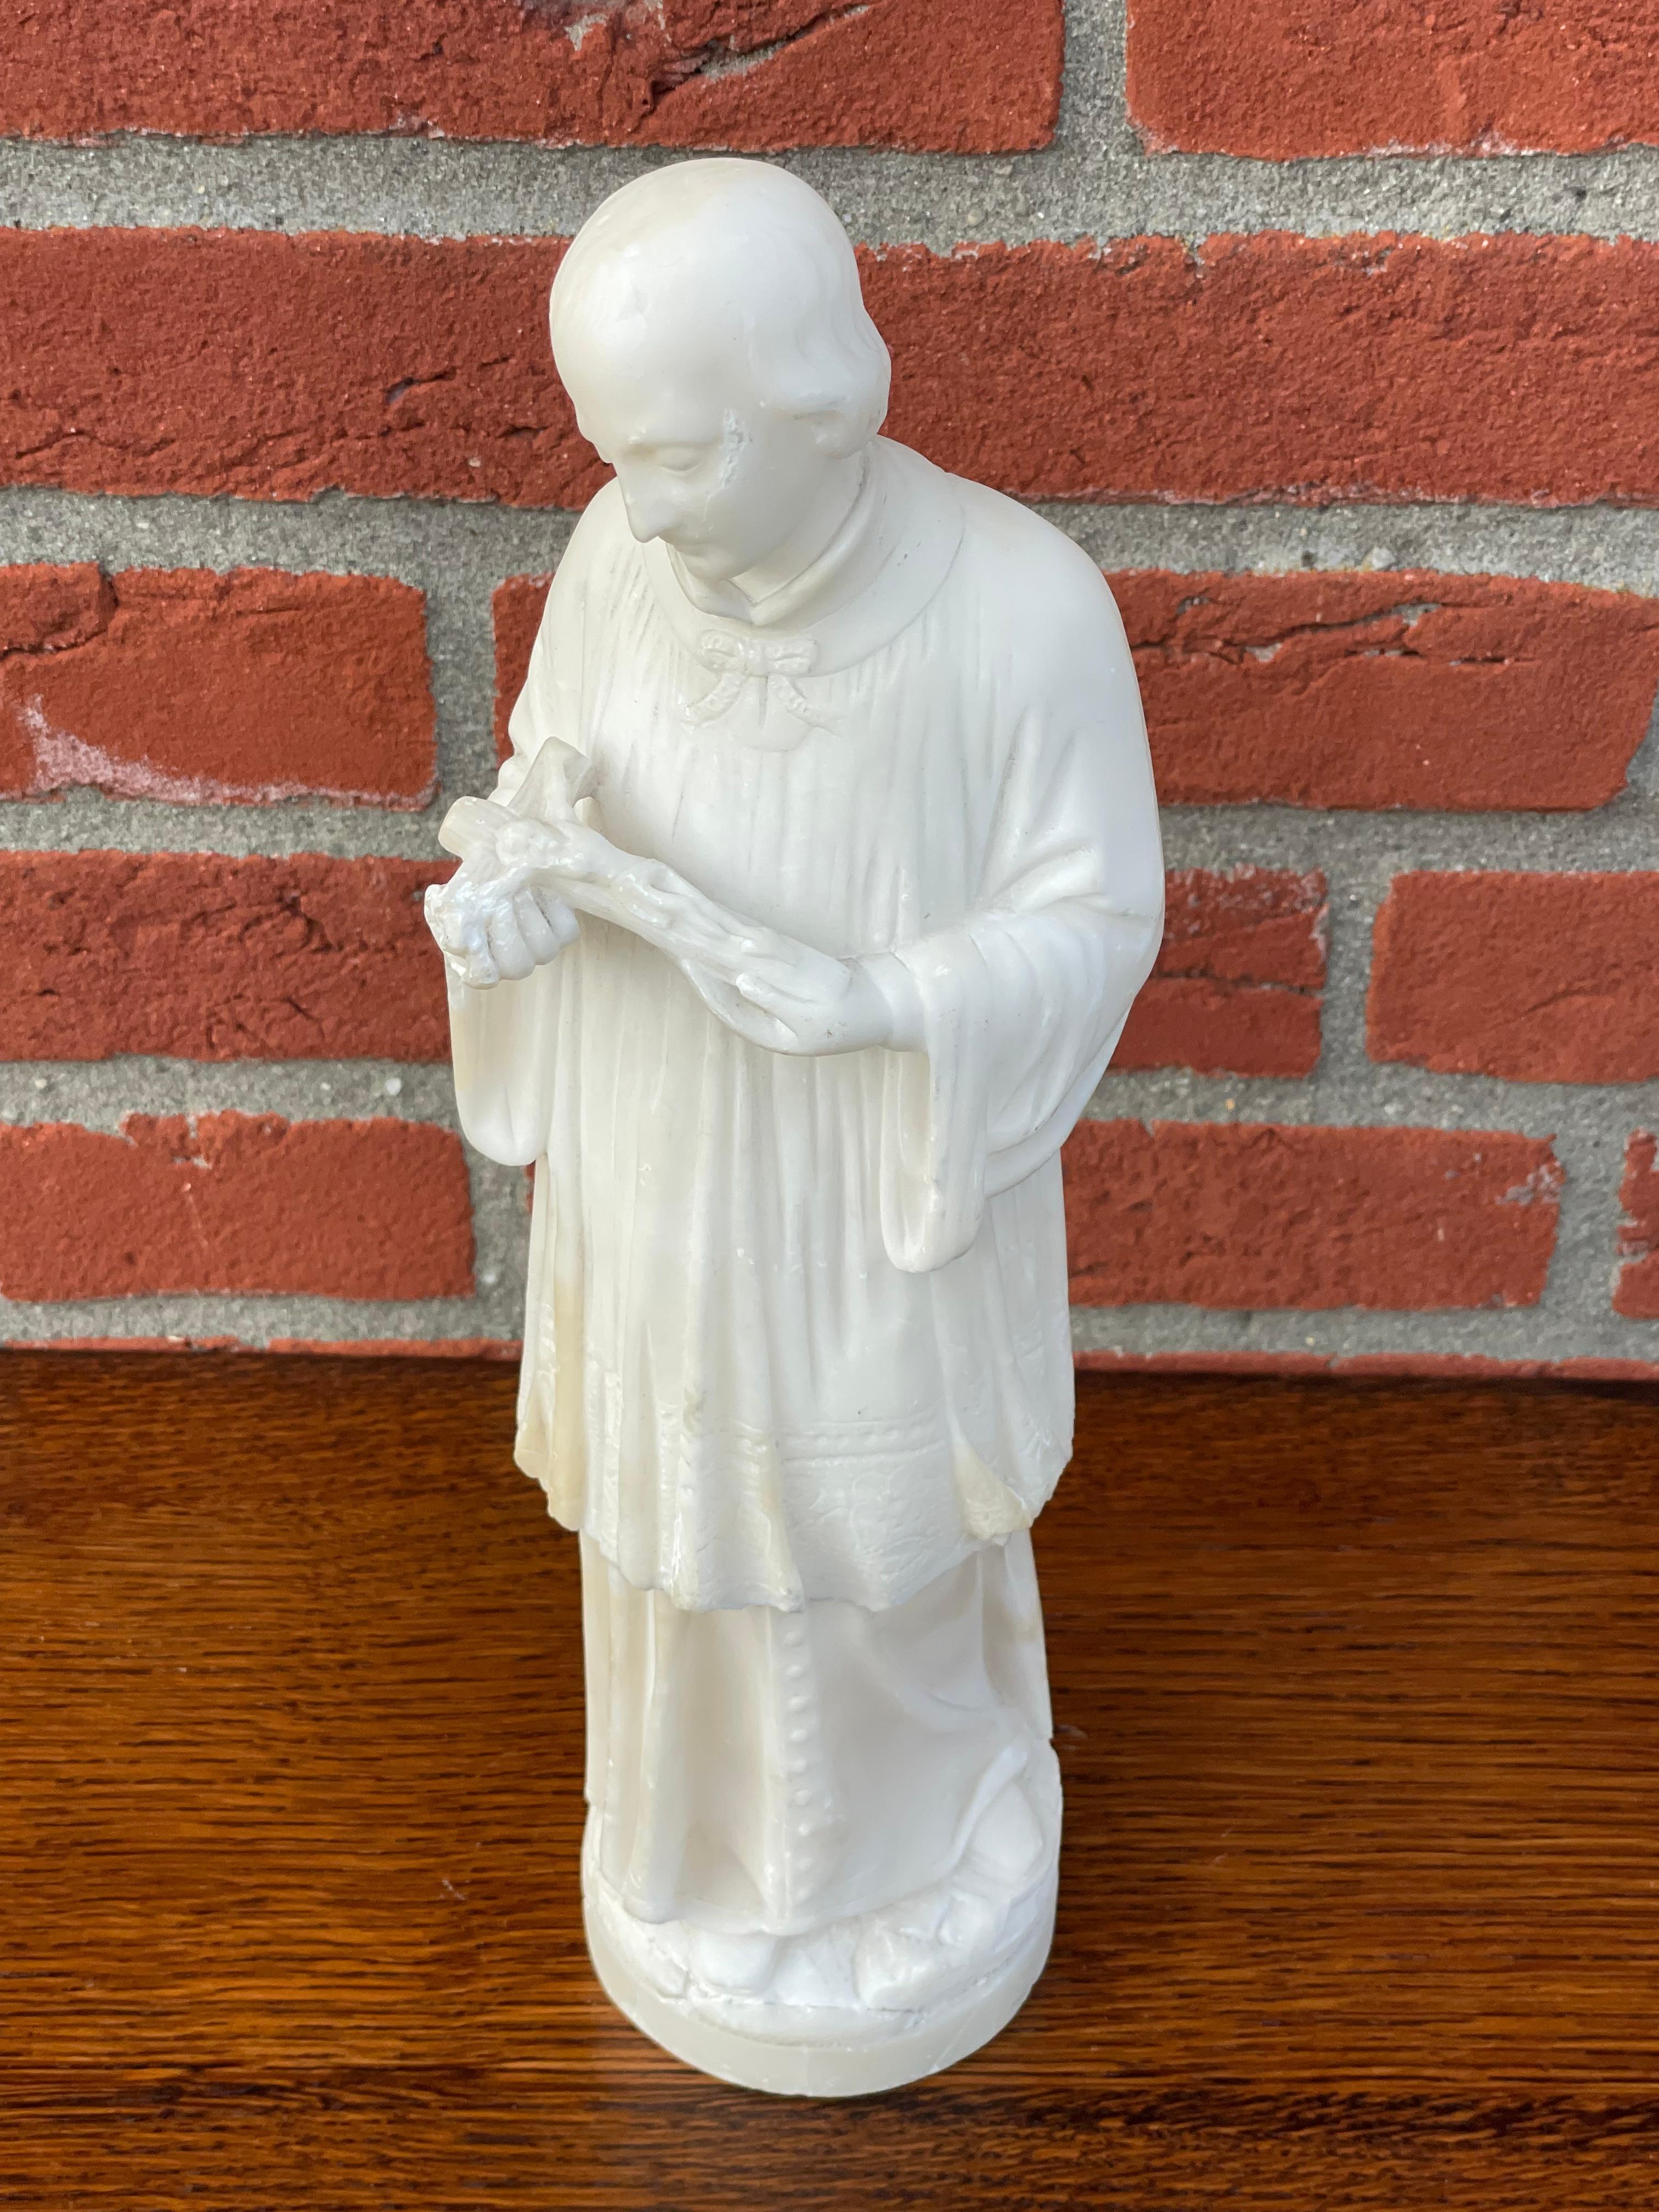 Antique, hand carved Italian work of religious art.

This Gerard Majella sculpture is another one of our recent rare finds. Also, because this could very well have been a grand tour purchase of a very well-to-do traveler. This Italian born Saint was